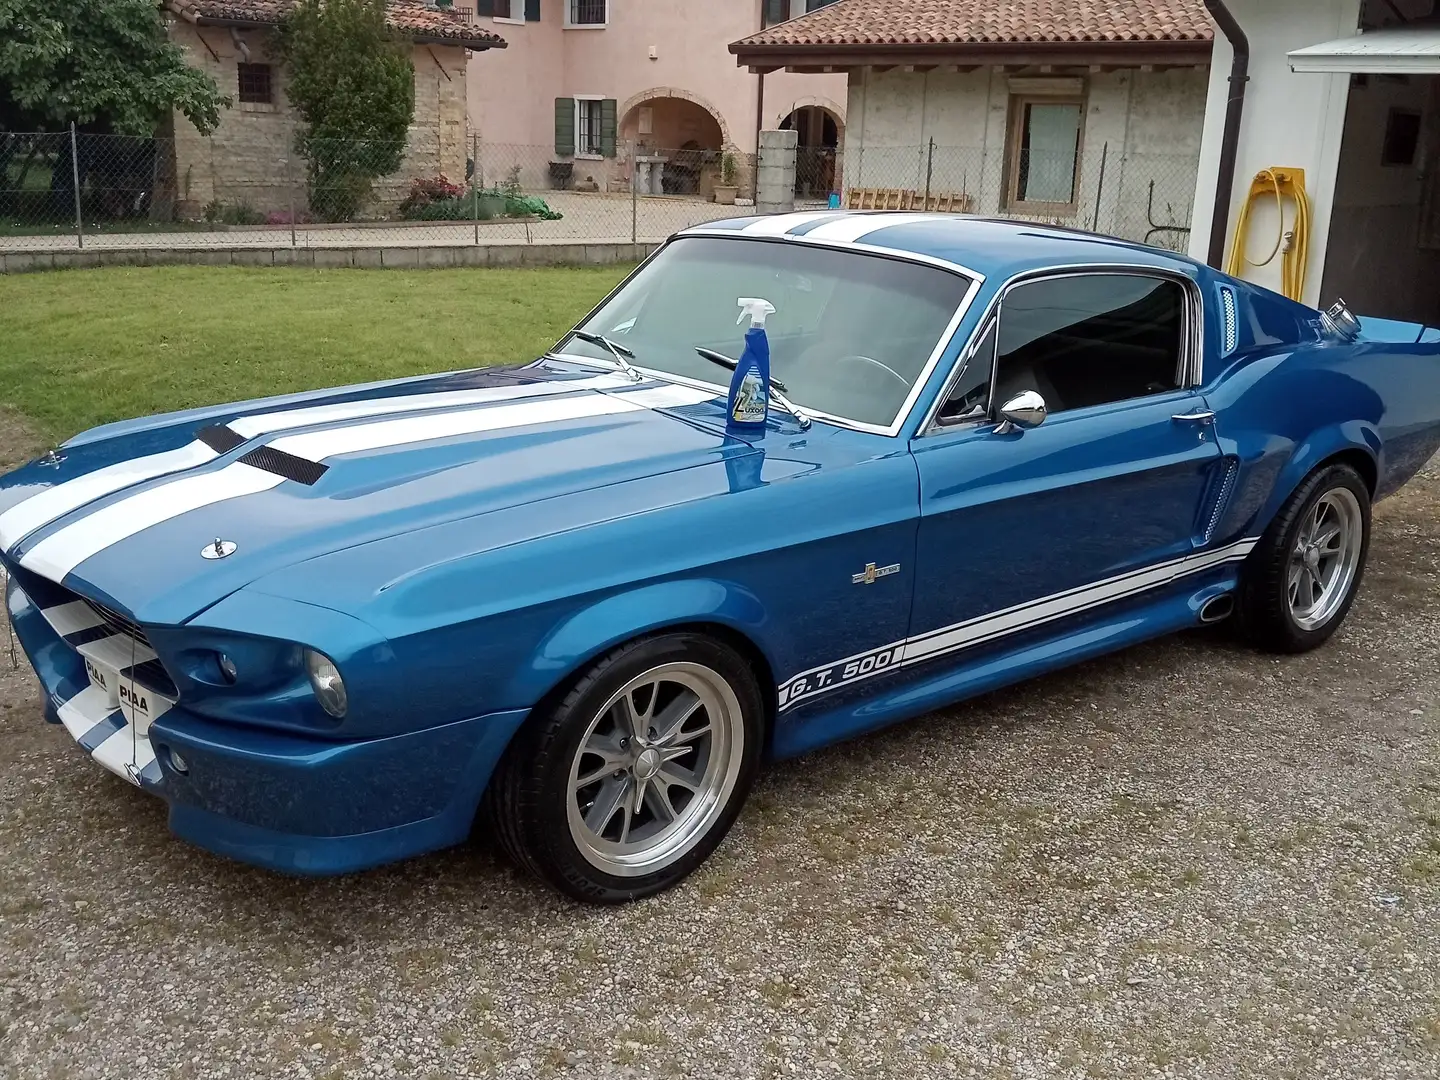 Ford Mustang Shelby GT 500 "Eleanor" Blue - 1